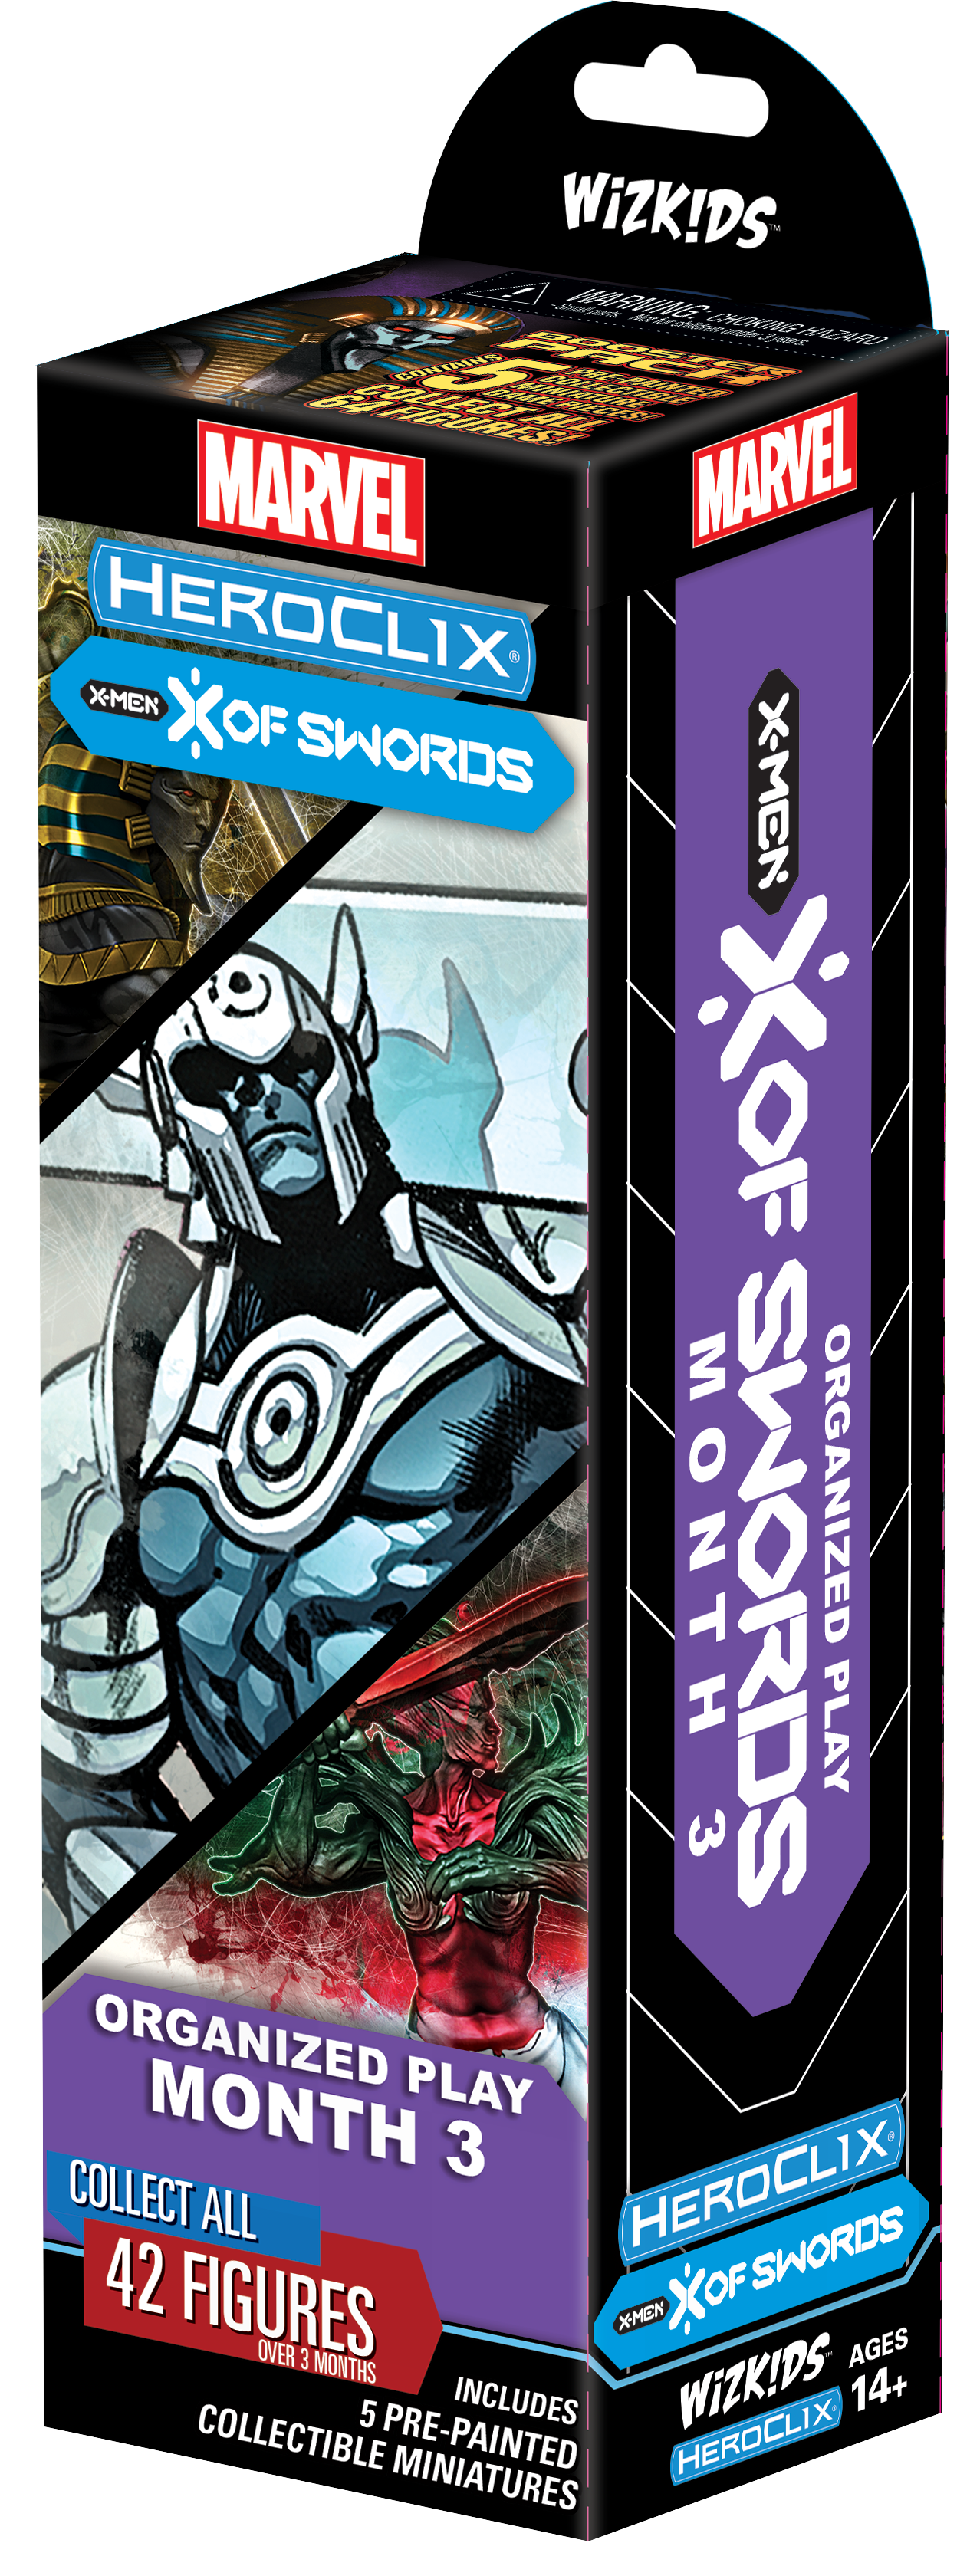 Heroclix: Marvel Heroclix X-Men X of Swords Storyline Organized Play Booster Pack Month 3